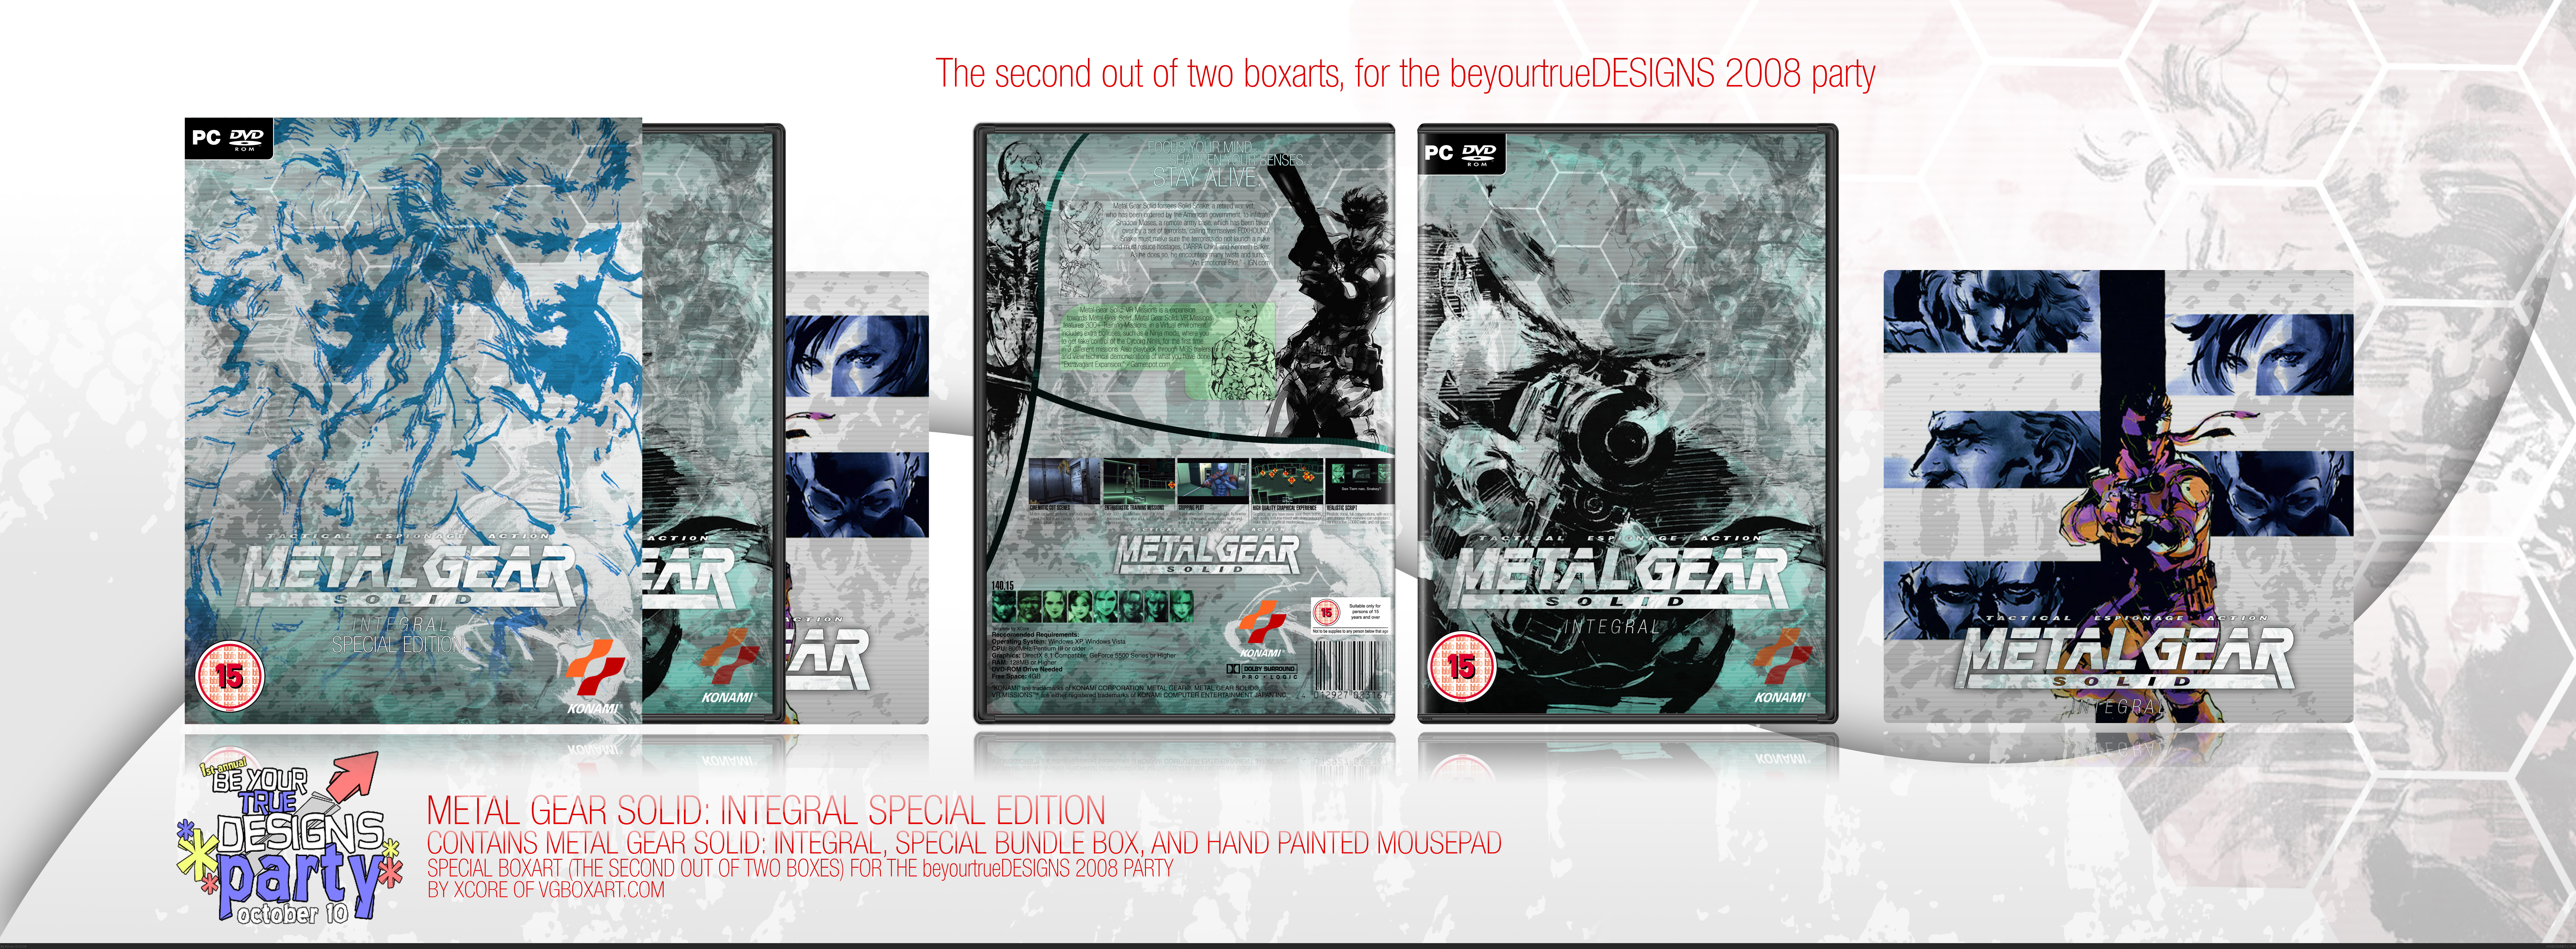 Metal Gear Solid: Integral Special Edition box cover